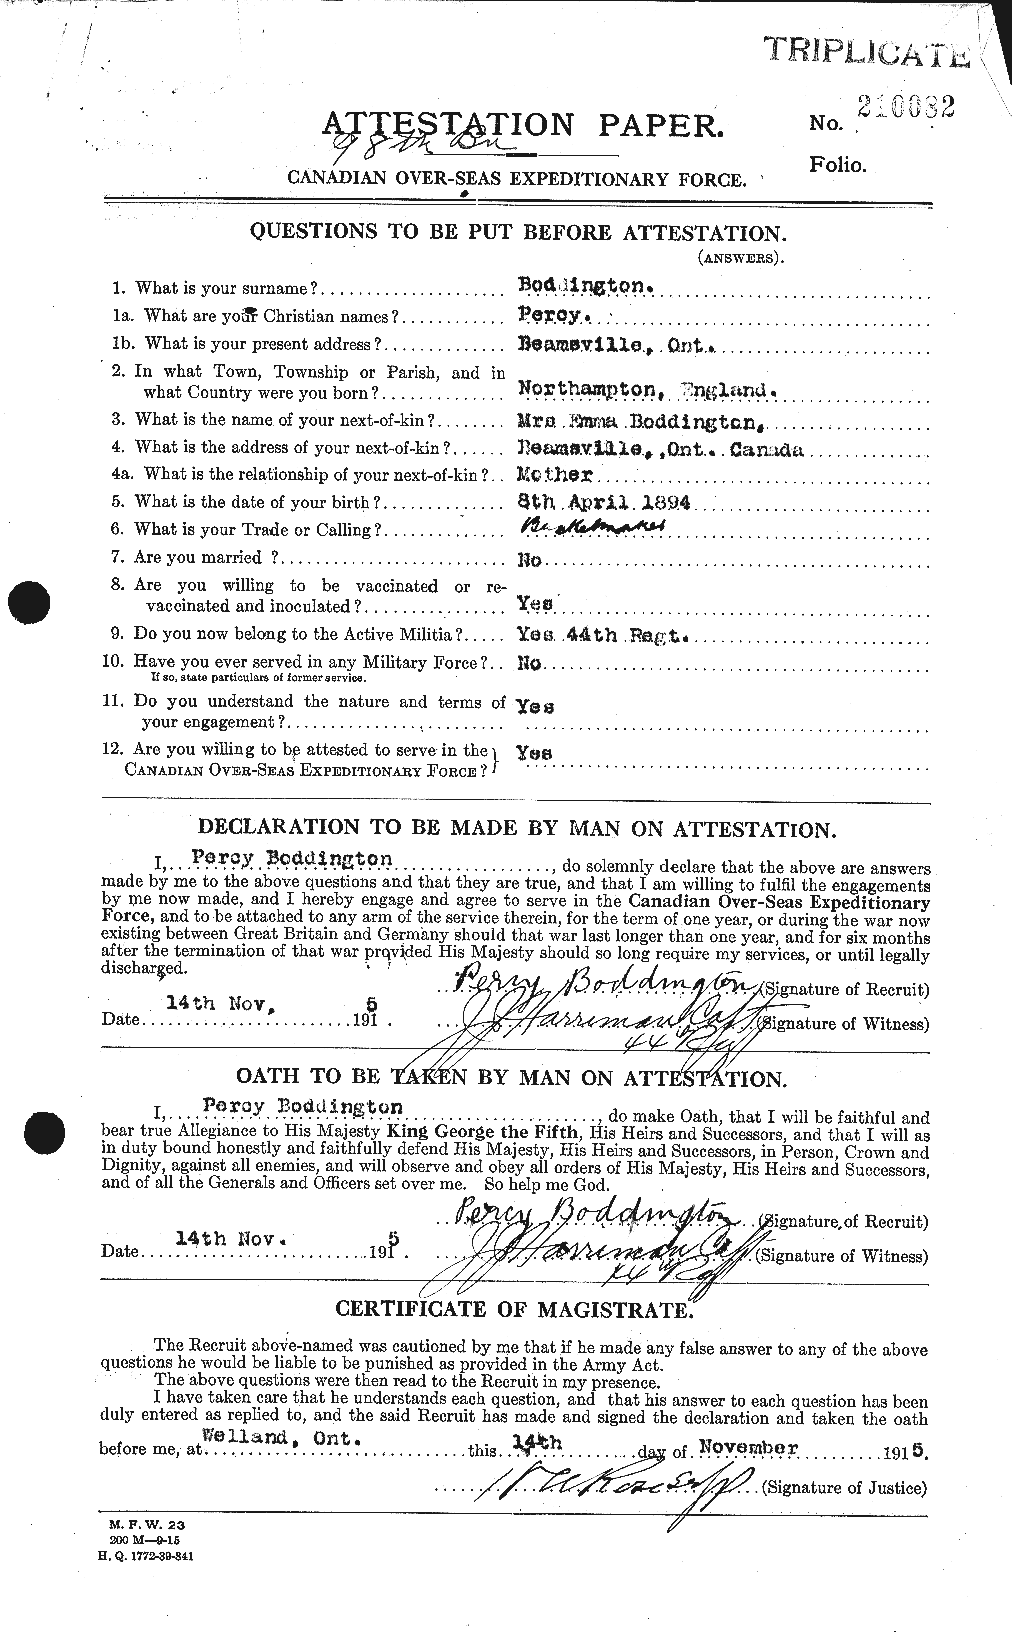 Personnel Records of the First World War - CEF 245251a